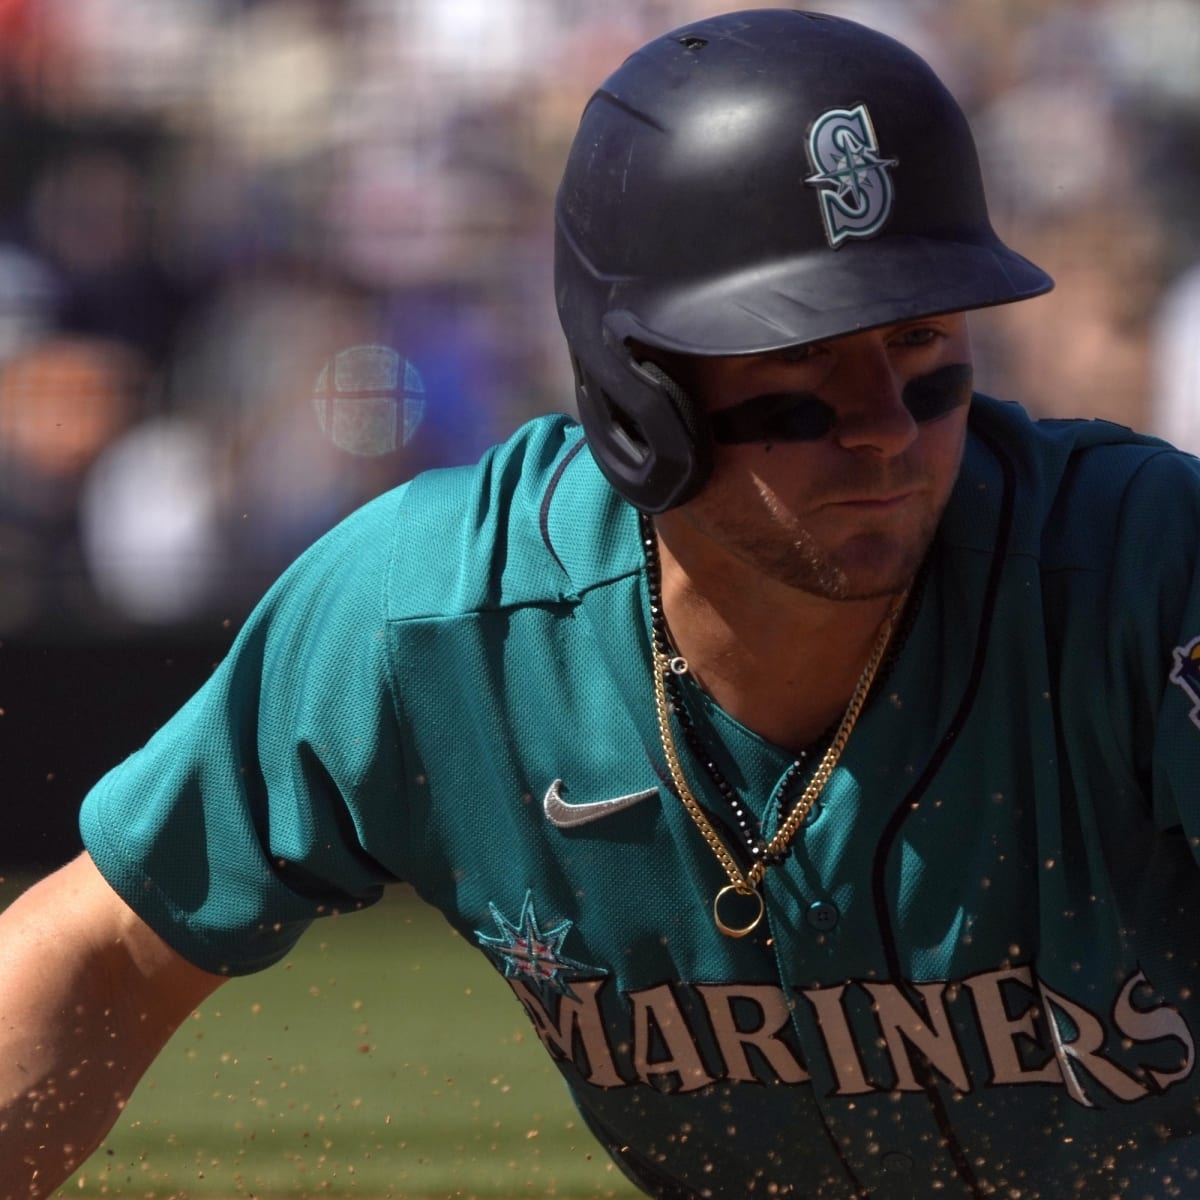 Mariners To Wear New Spring Training Uniforms, by Mariners PR